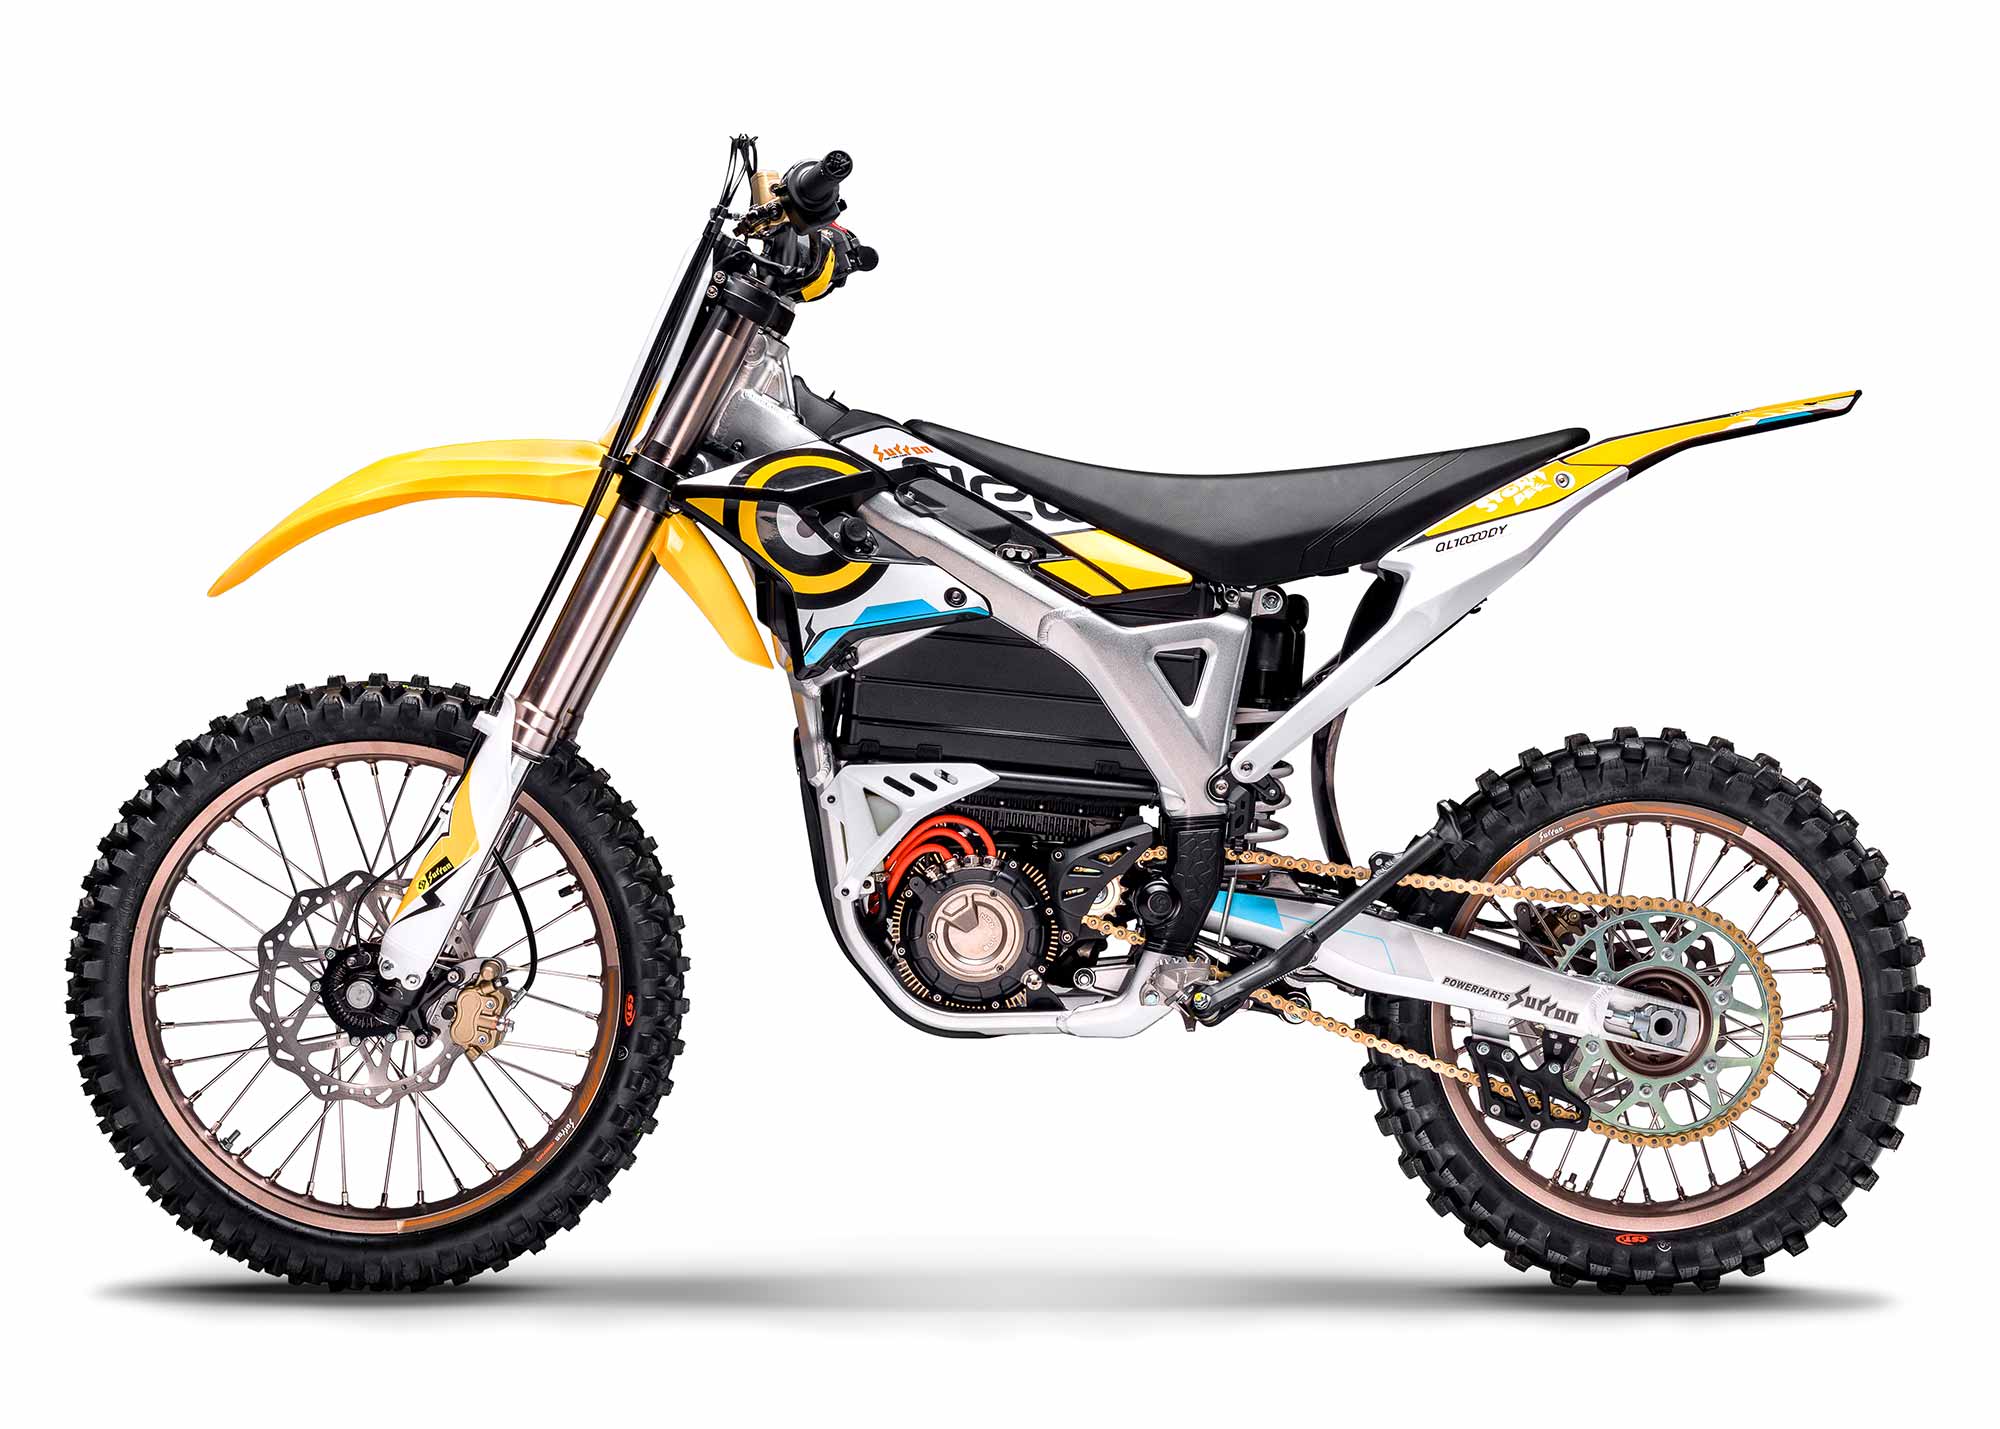 2023 Surron Storm Bee F Electric Dirt Bike First Look Dirt Rider